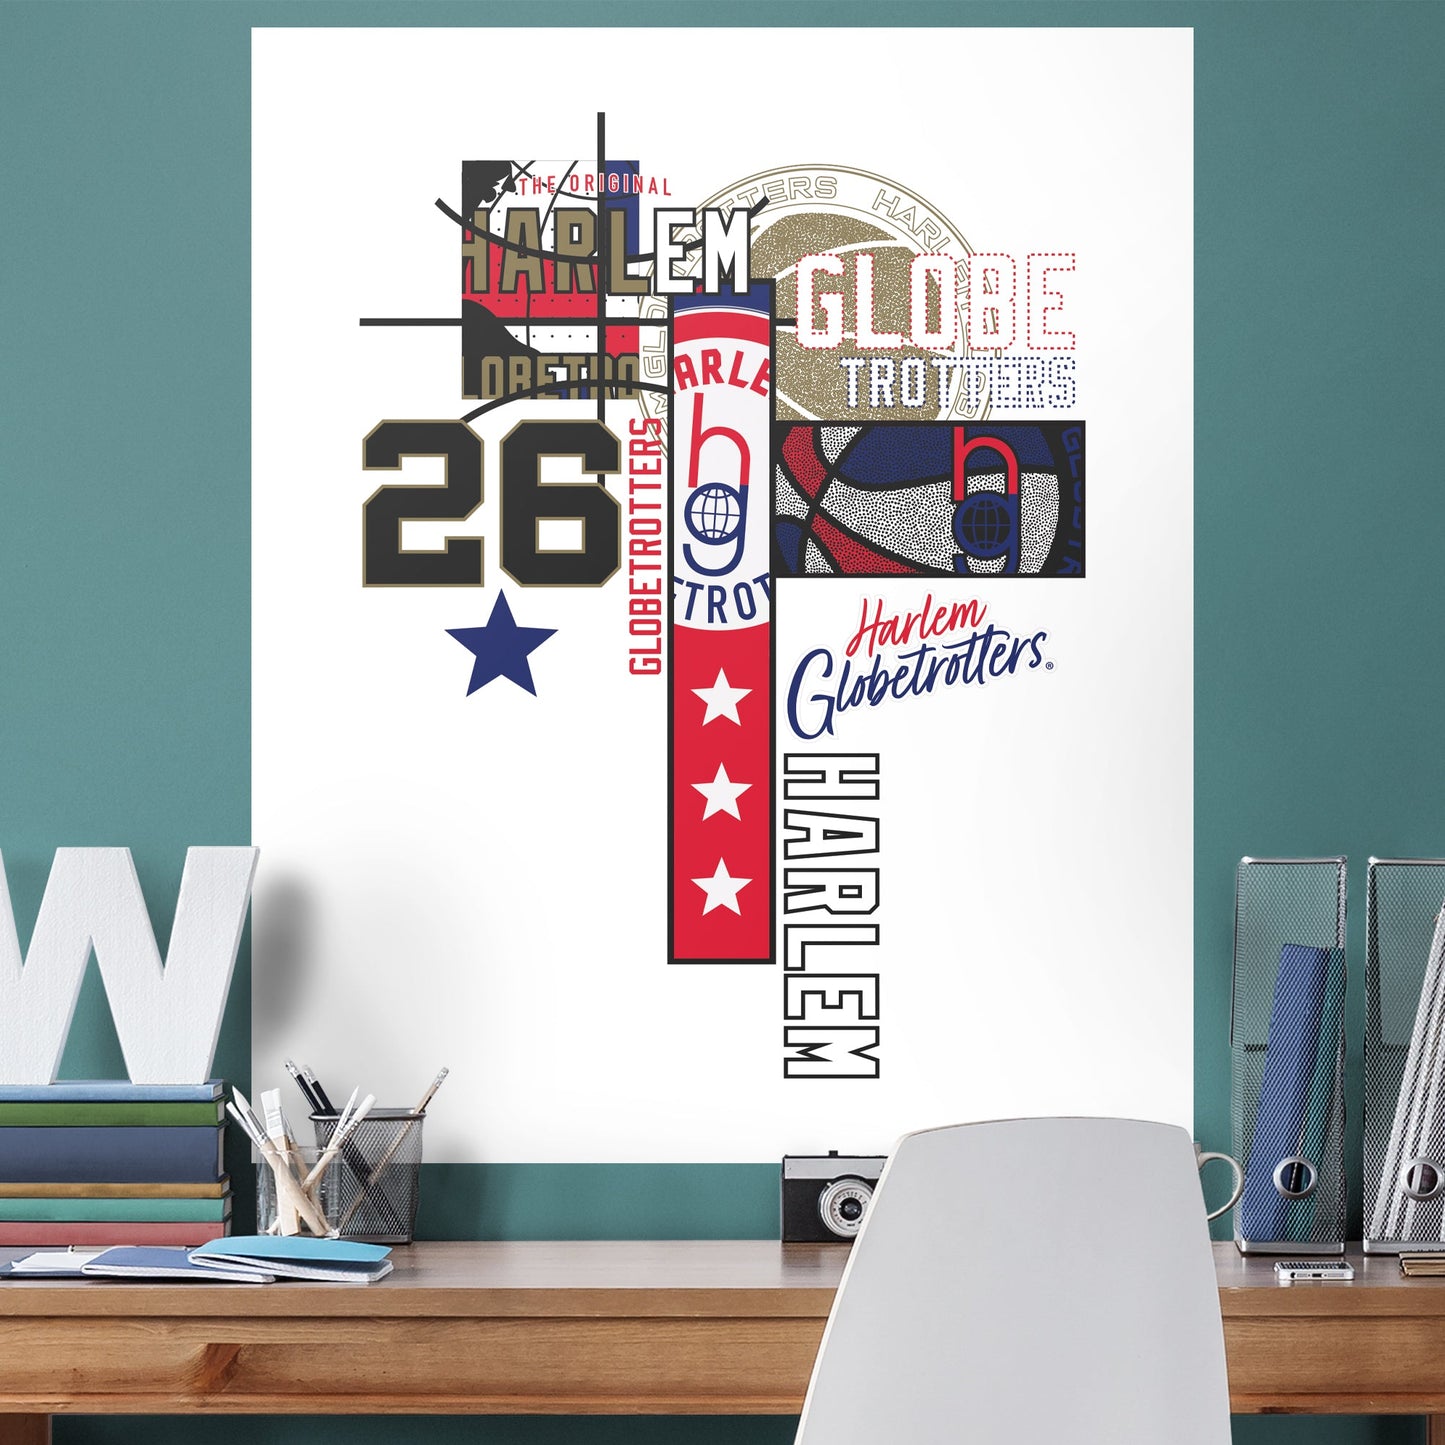 Harlem Globetrotters Collage Mural - Removable Adhesive Decal